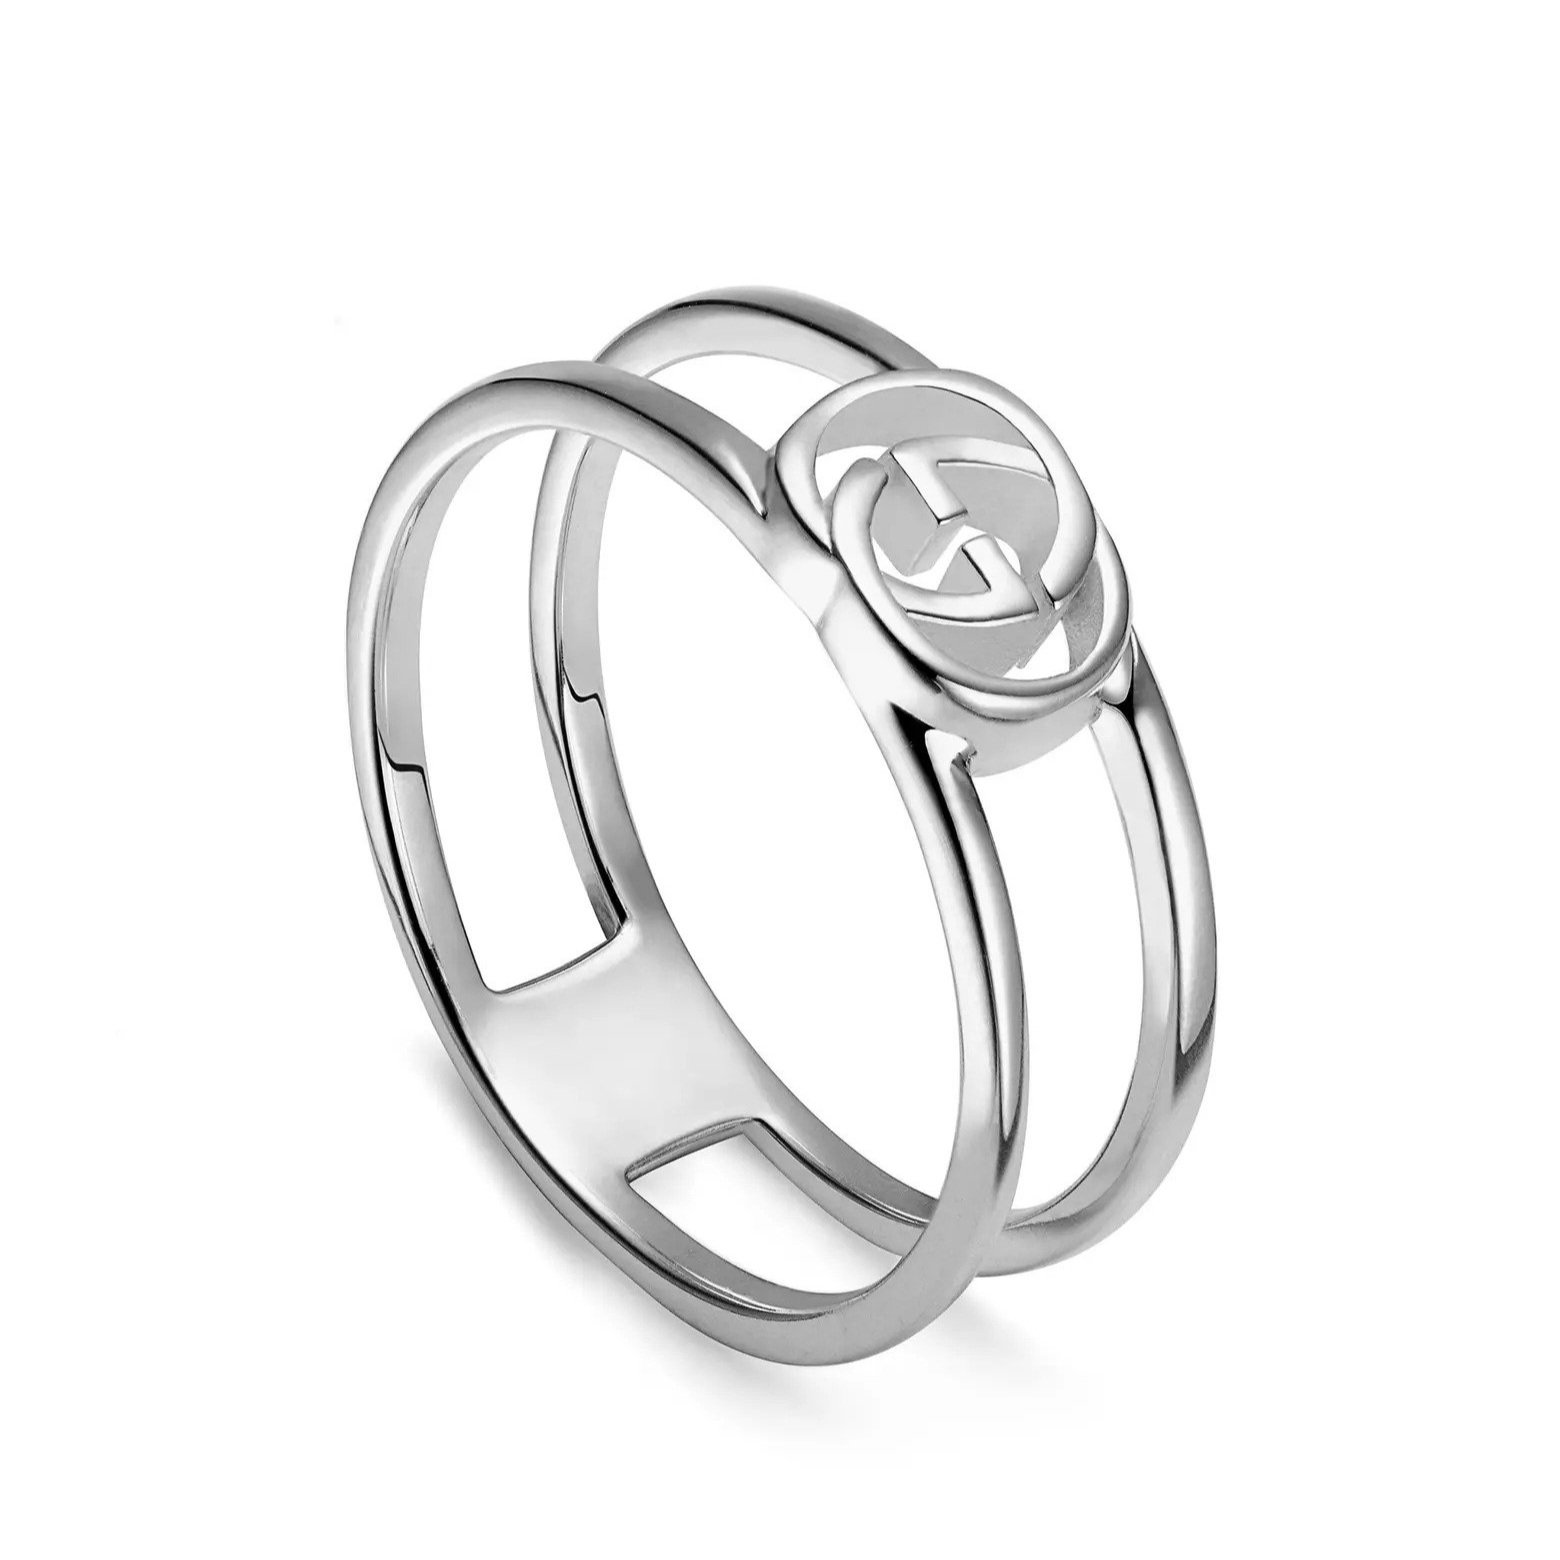 Gucci "Interlocking G Silver Ring" in sterling silver, $300 at Nordstrom